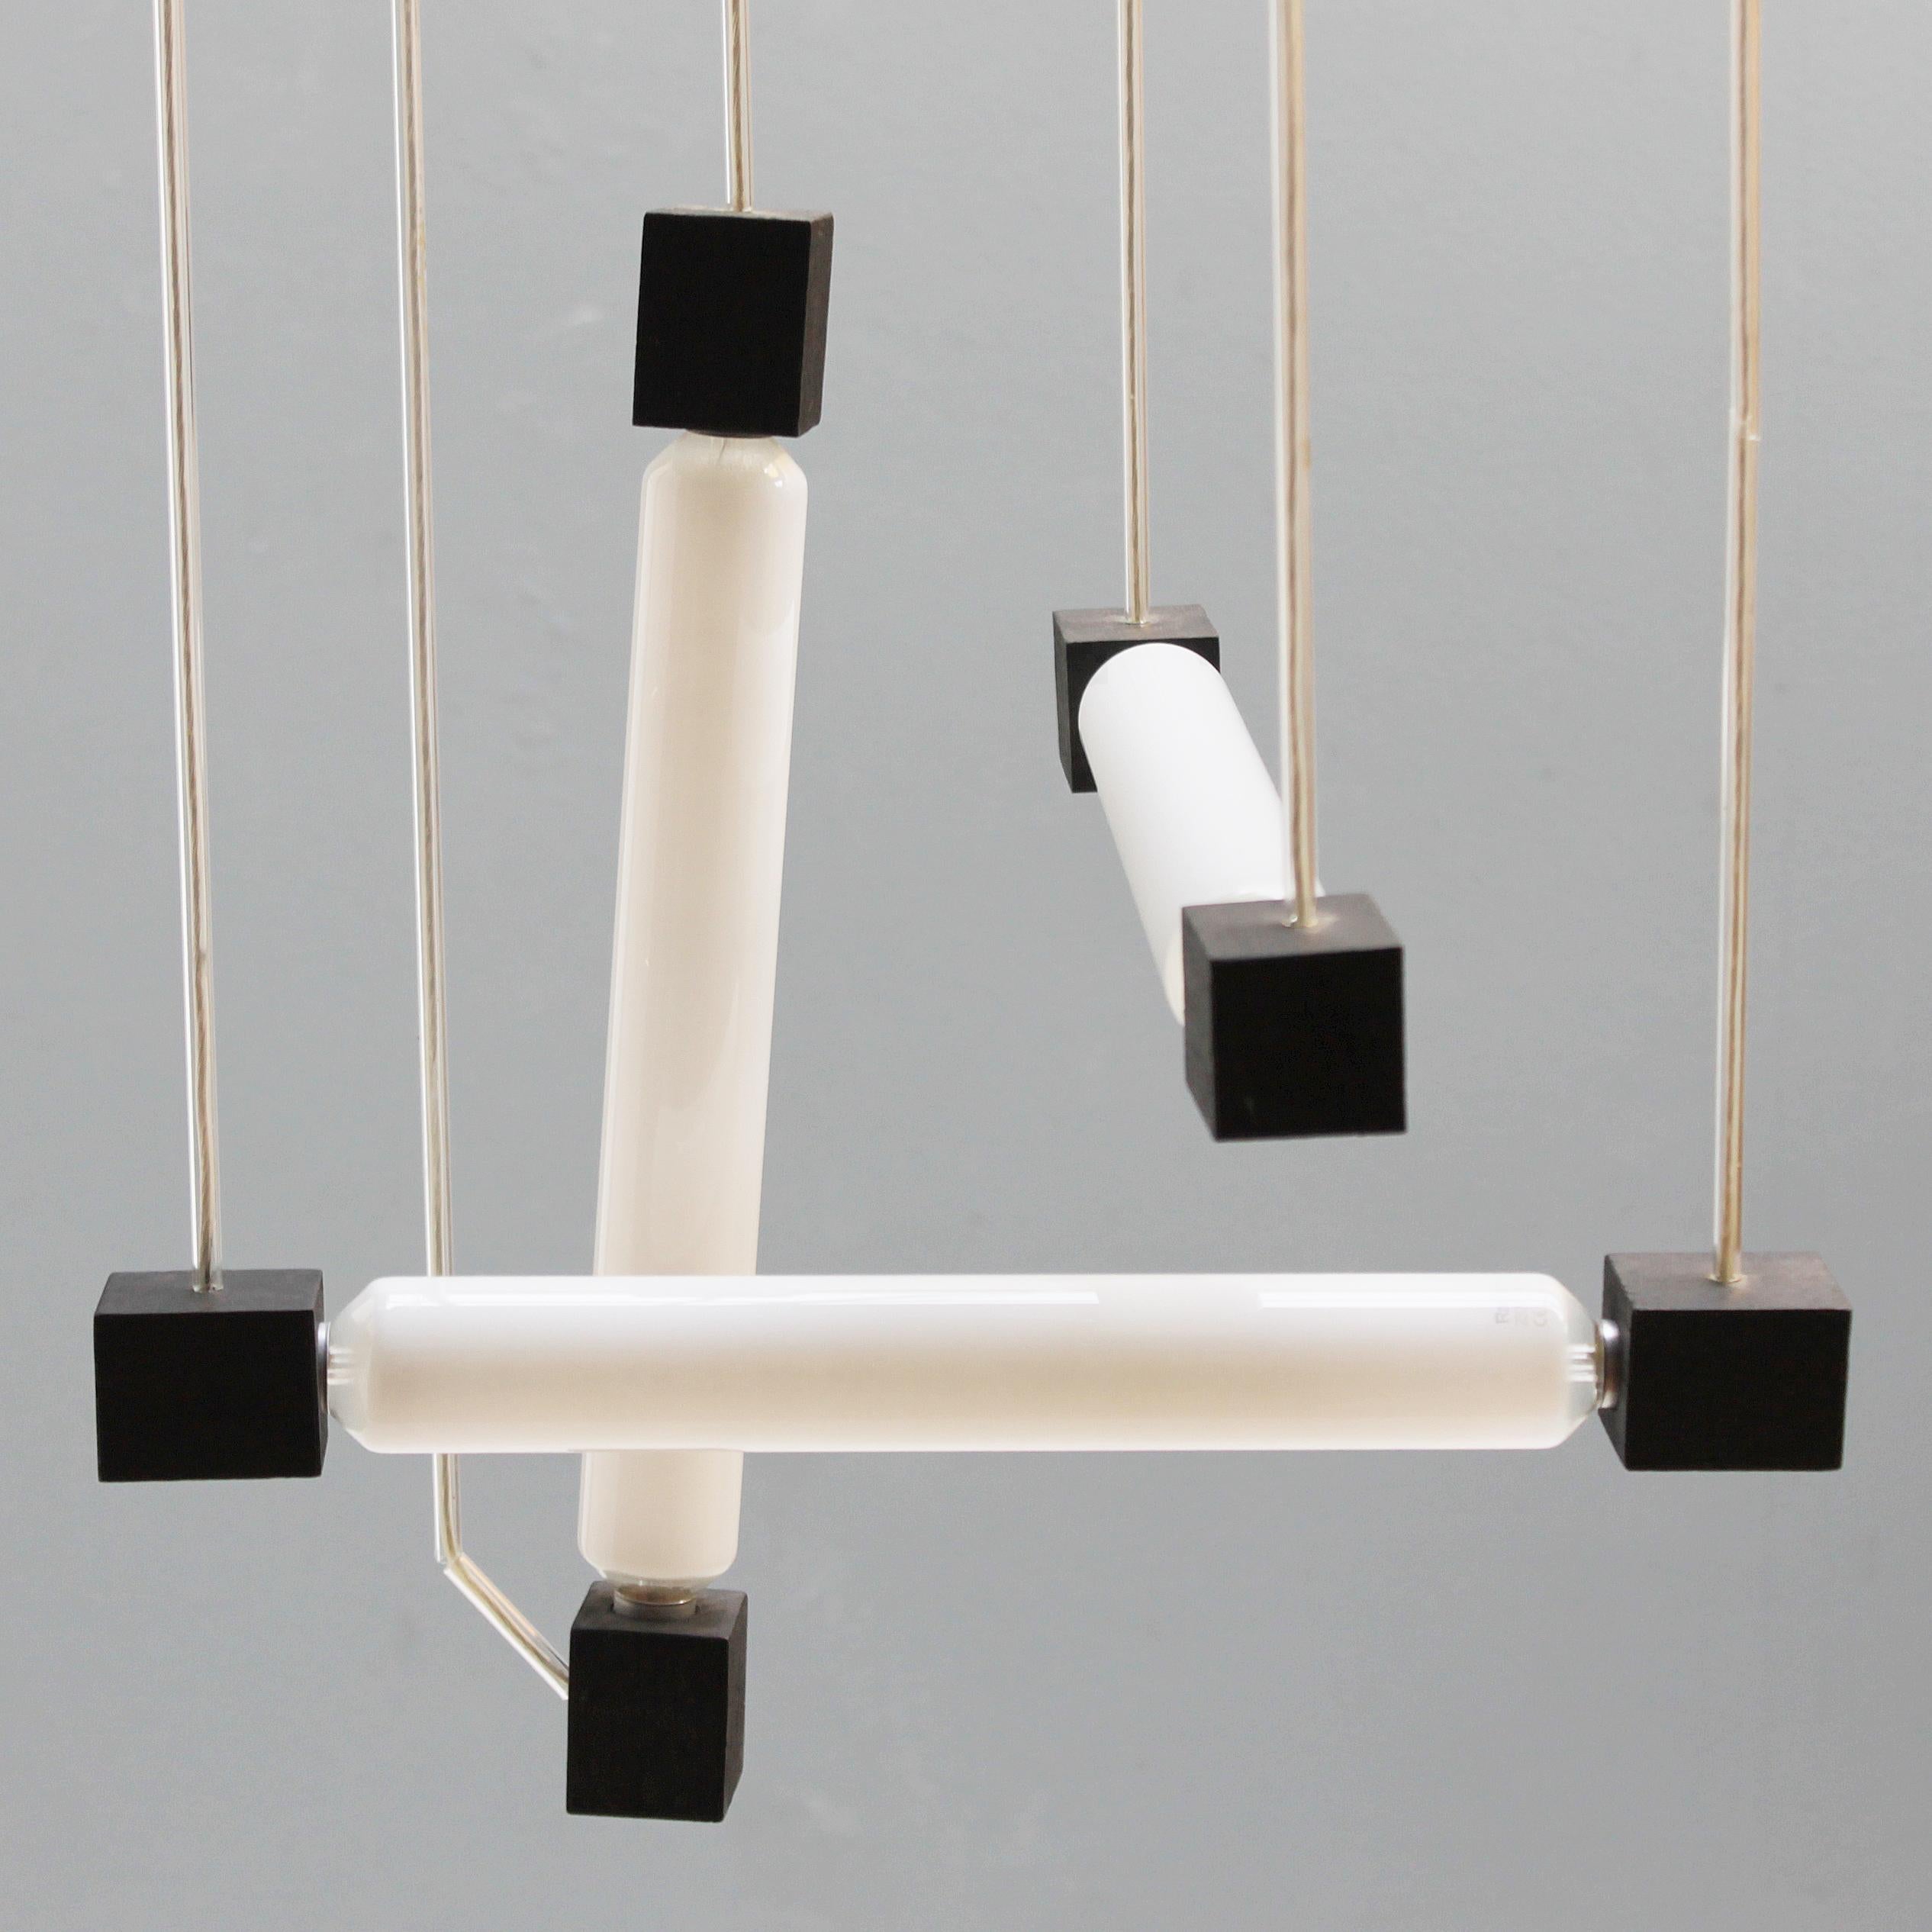 'Buizenlamp' Attributed to Gerrit Rietveld For Sale 1